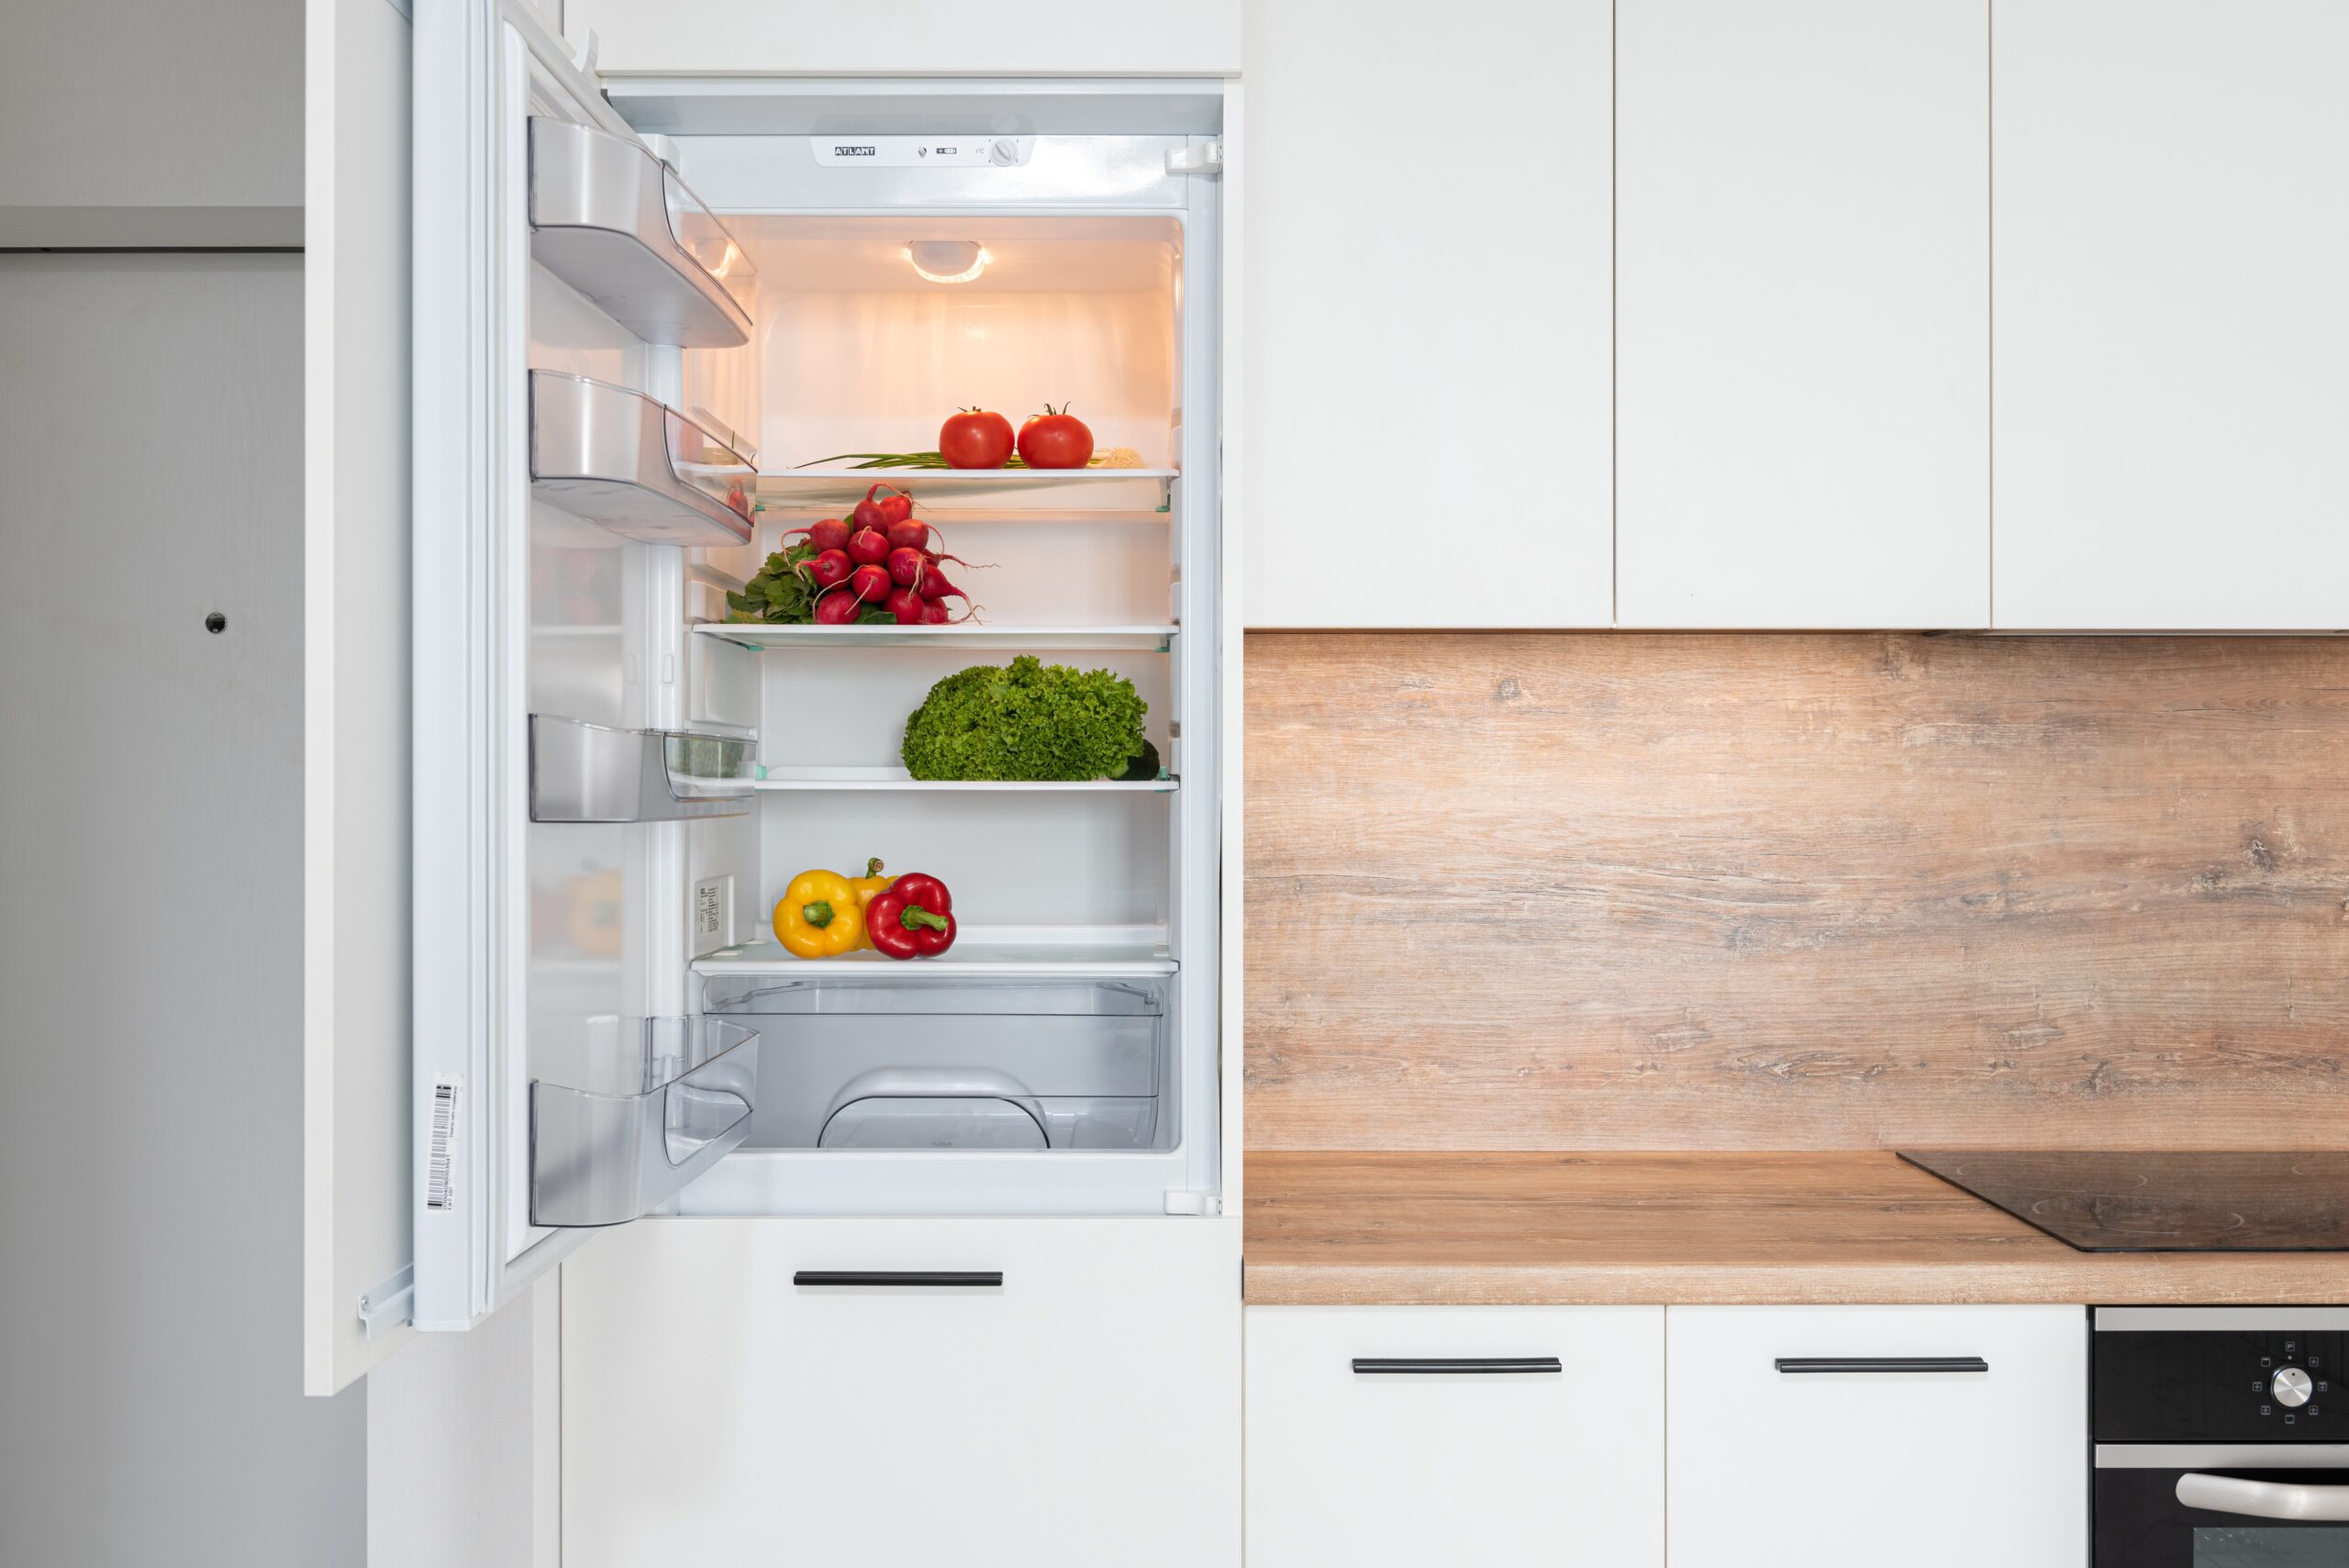 Simple tips and tricks for maintaining your refrigerator